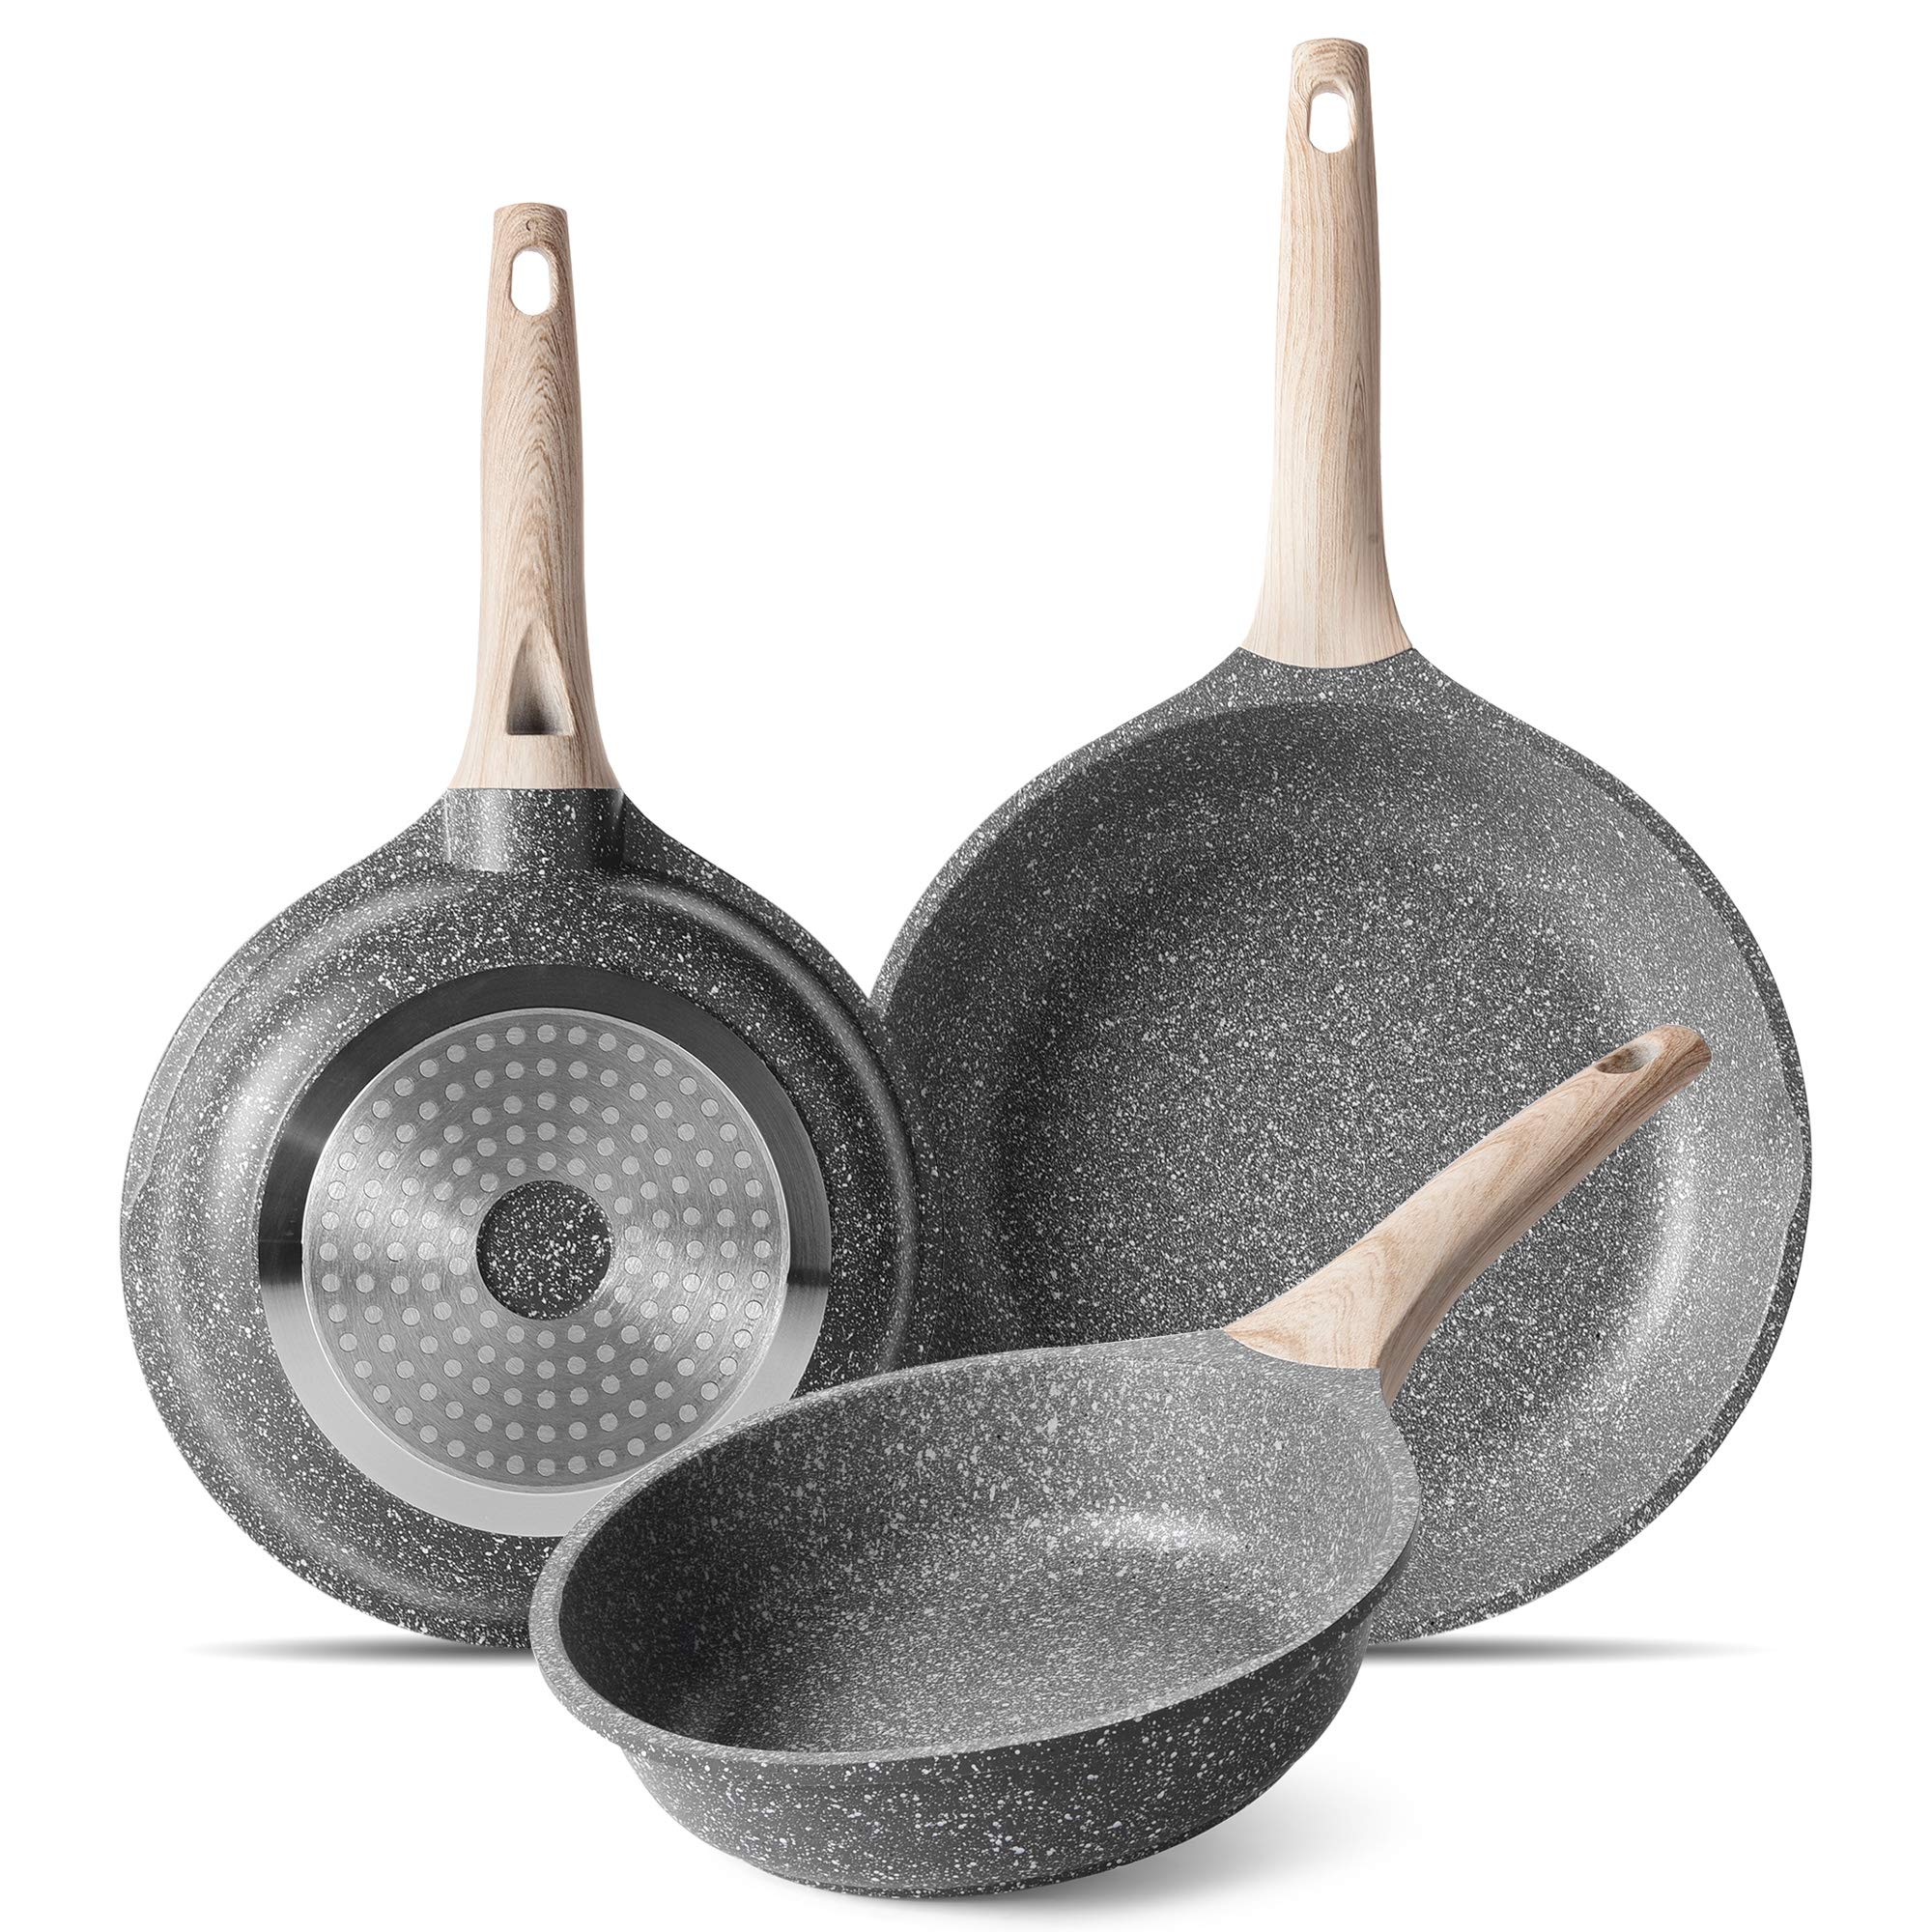 ZUOFENG Non Stick Frying Pan 3 Sets